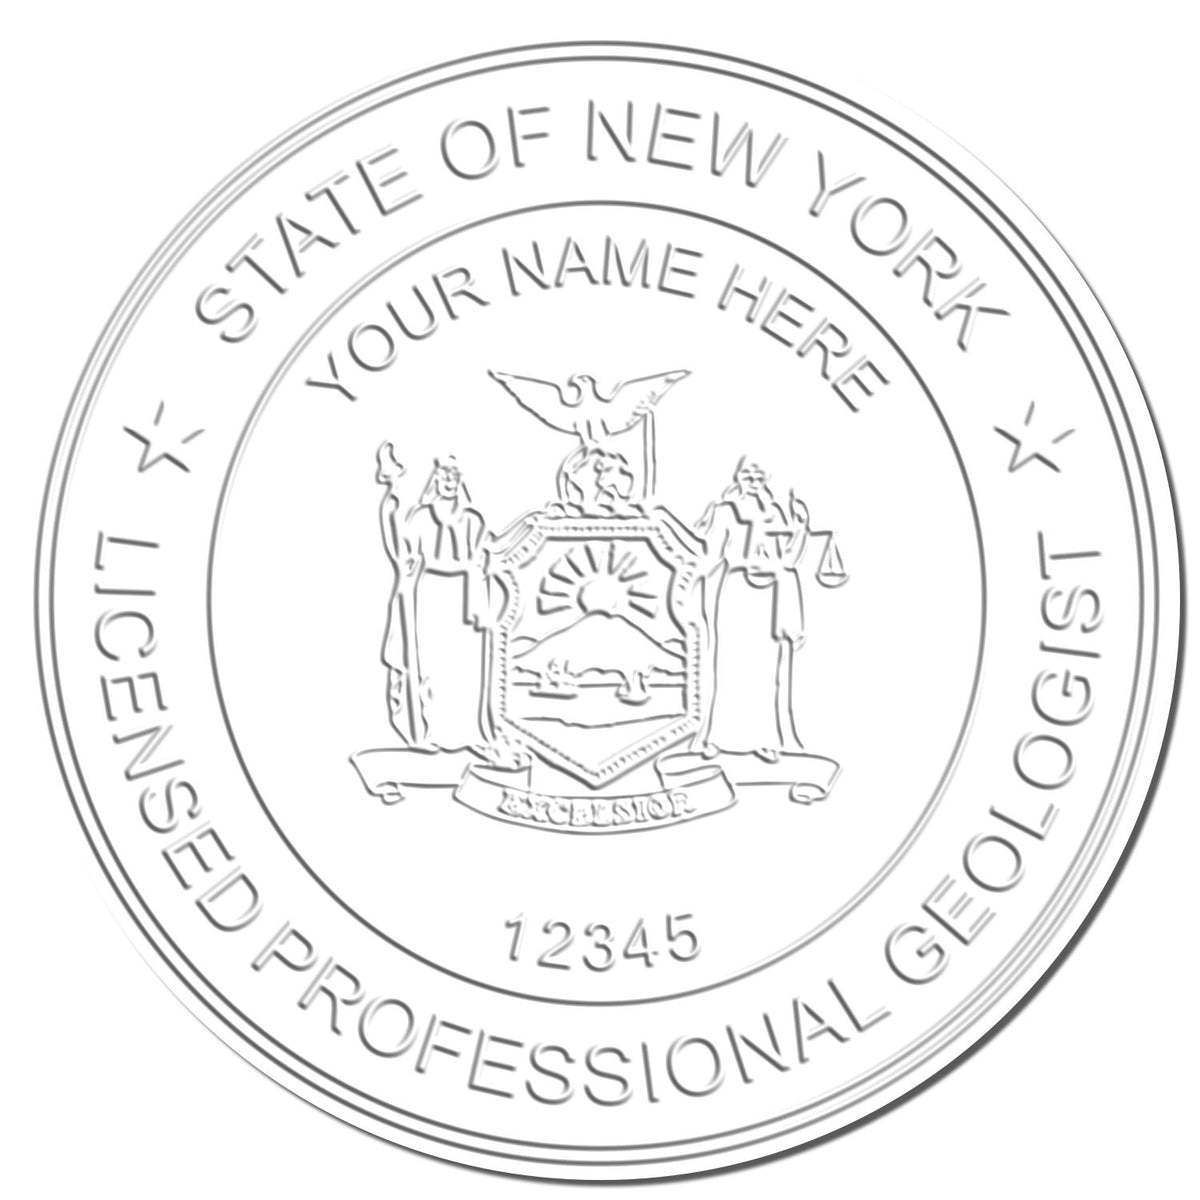 A photograph of the Hybrid New York Geologist Seal stamp impression reveals a vivid, professional image of the on paper.